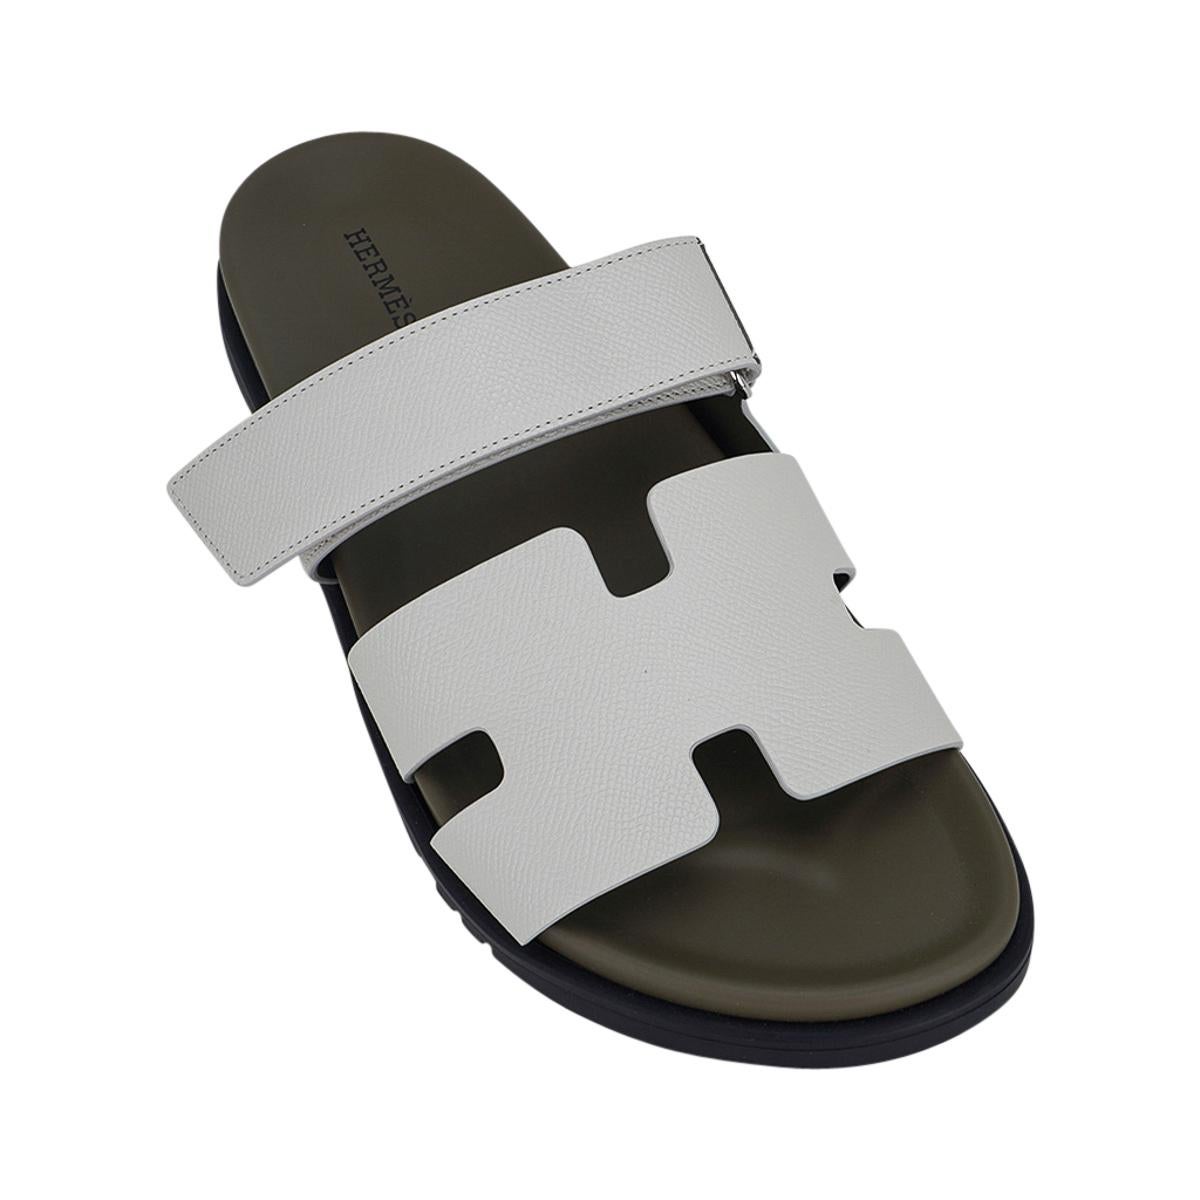 Mightychic offers a limited edition Hermes Chypre Sandal featured in Glaise.
Epsom leather with Vert Toundra anatomical insole and H embossed black rubber sole.
Strap across foot is adjustable with velcro closure.
Comes with sleepers and signature